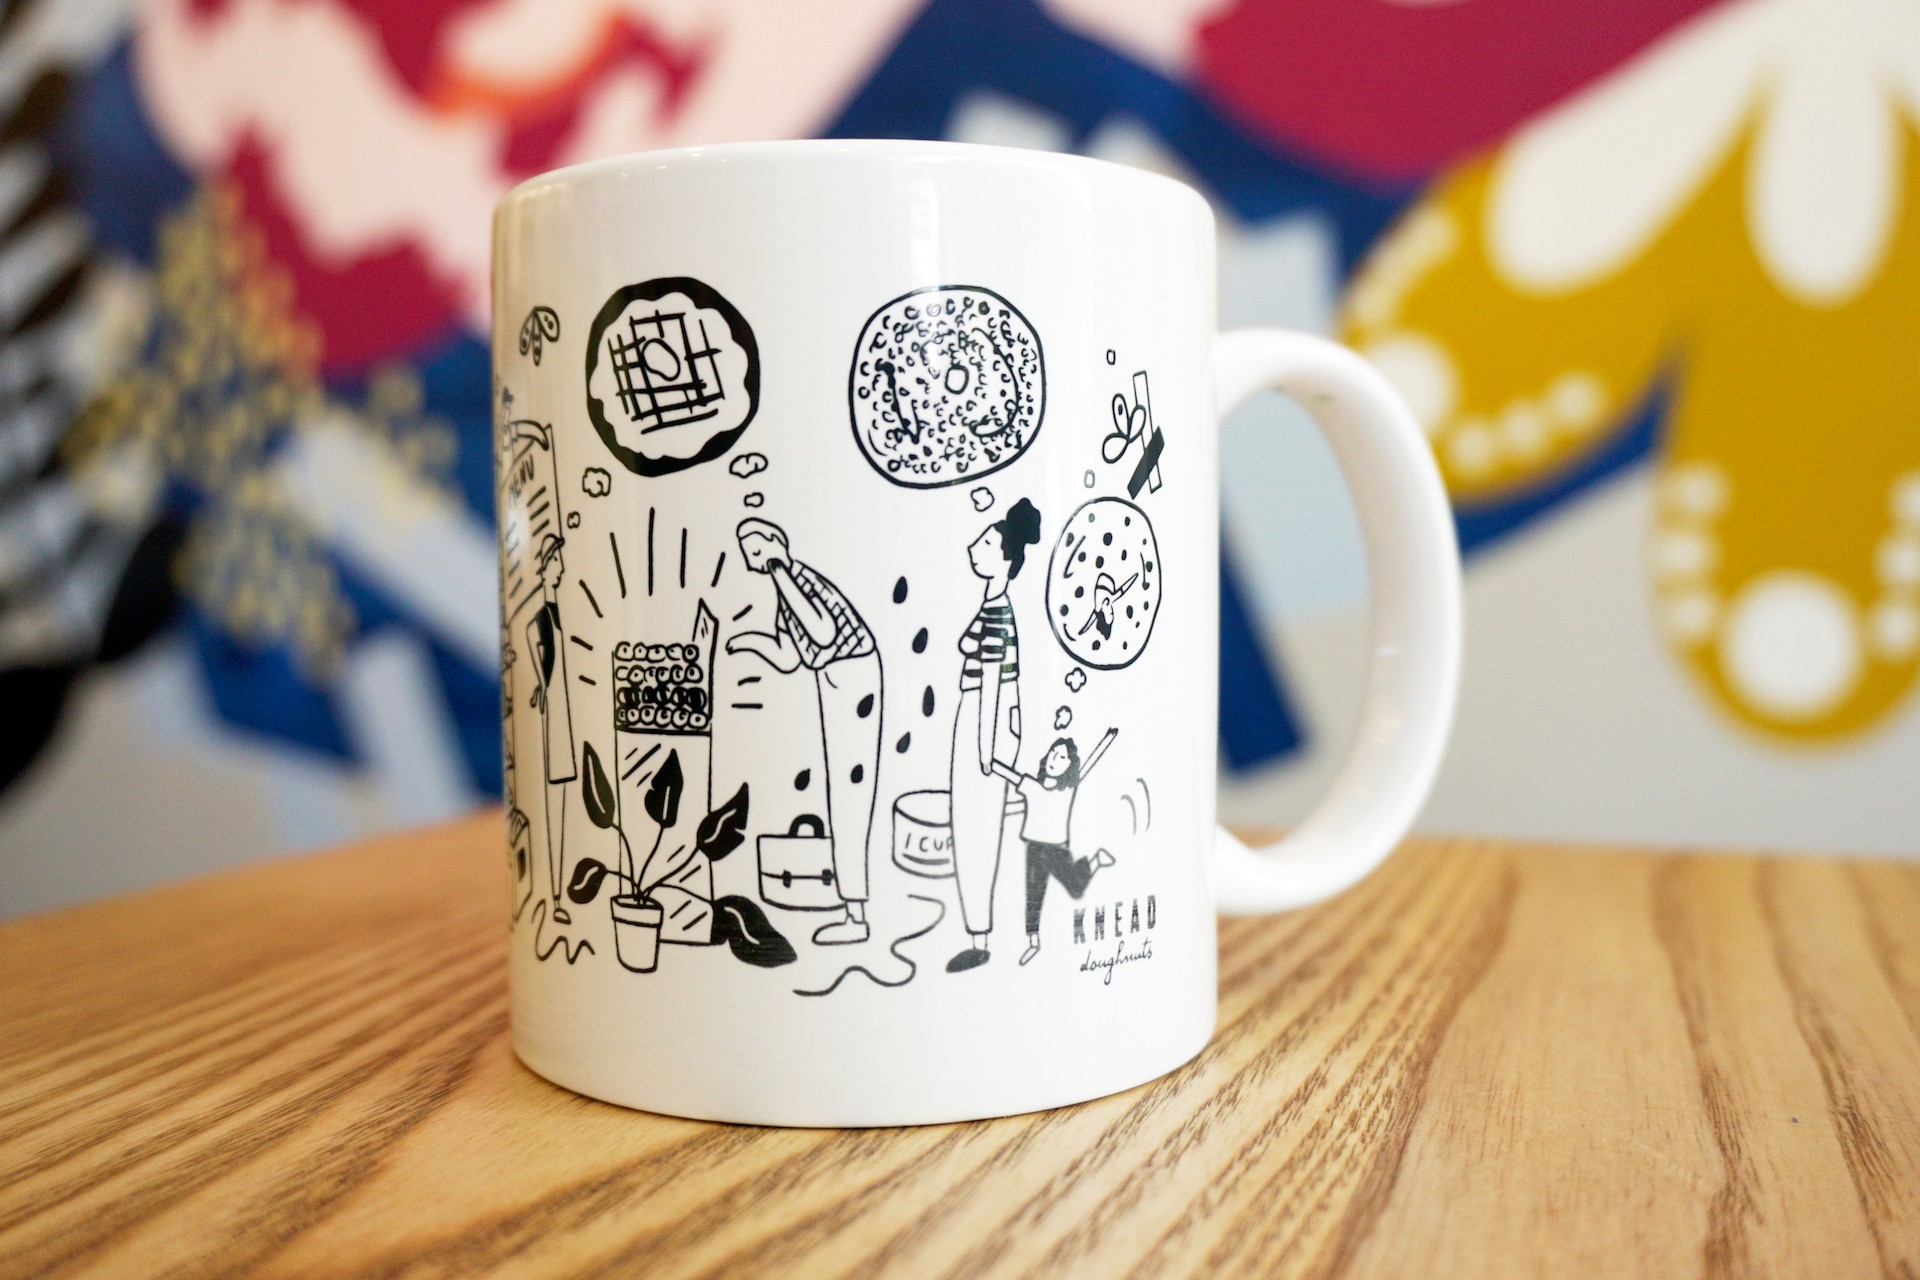 White ceramic mug on wooden table with colorful mural in background. Mug illustration includes oversized kitchen items, donuts, bakers and Knead customers.. 